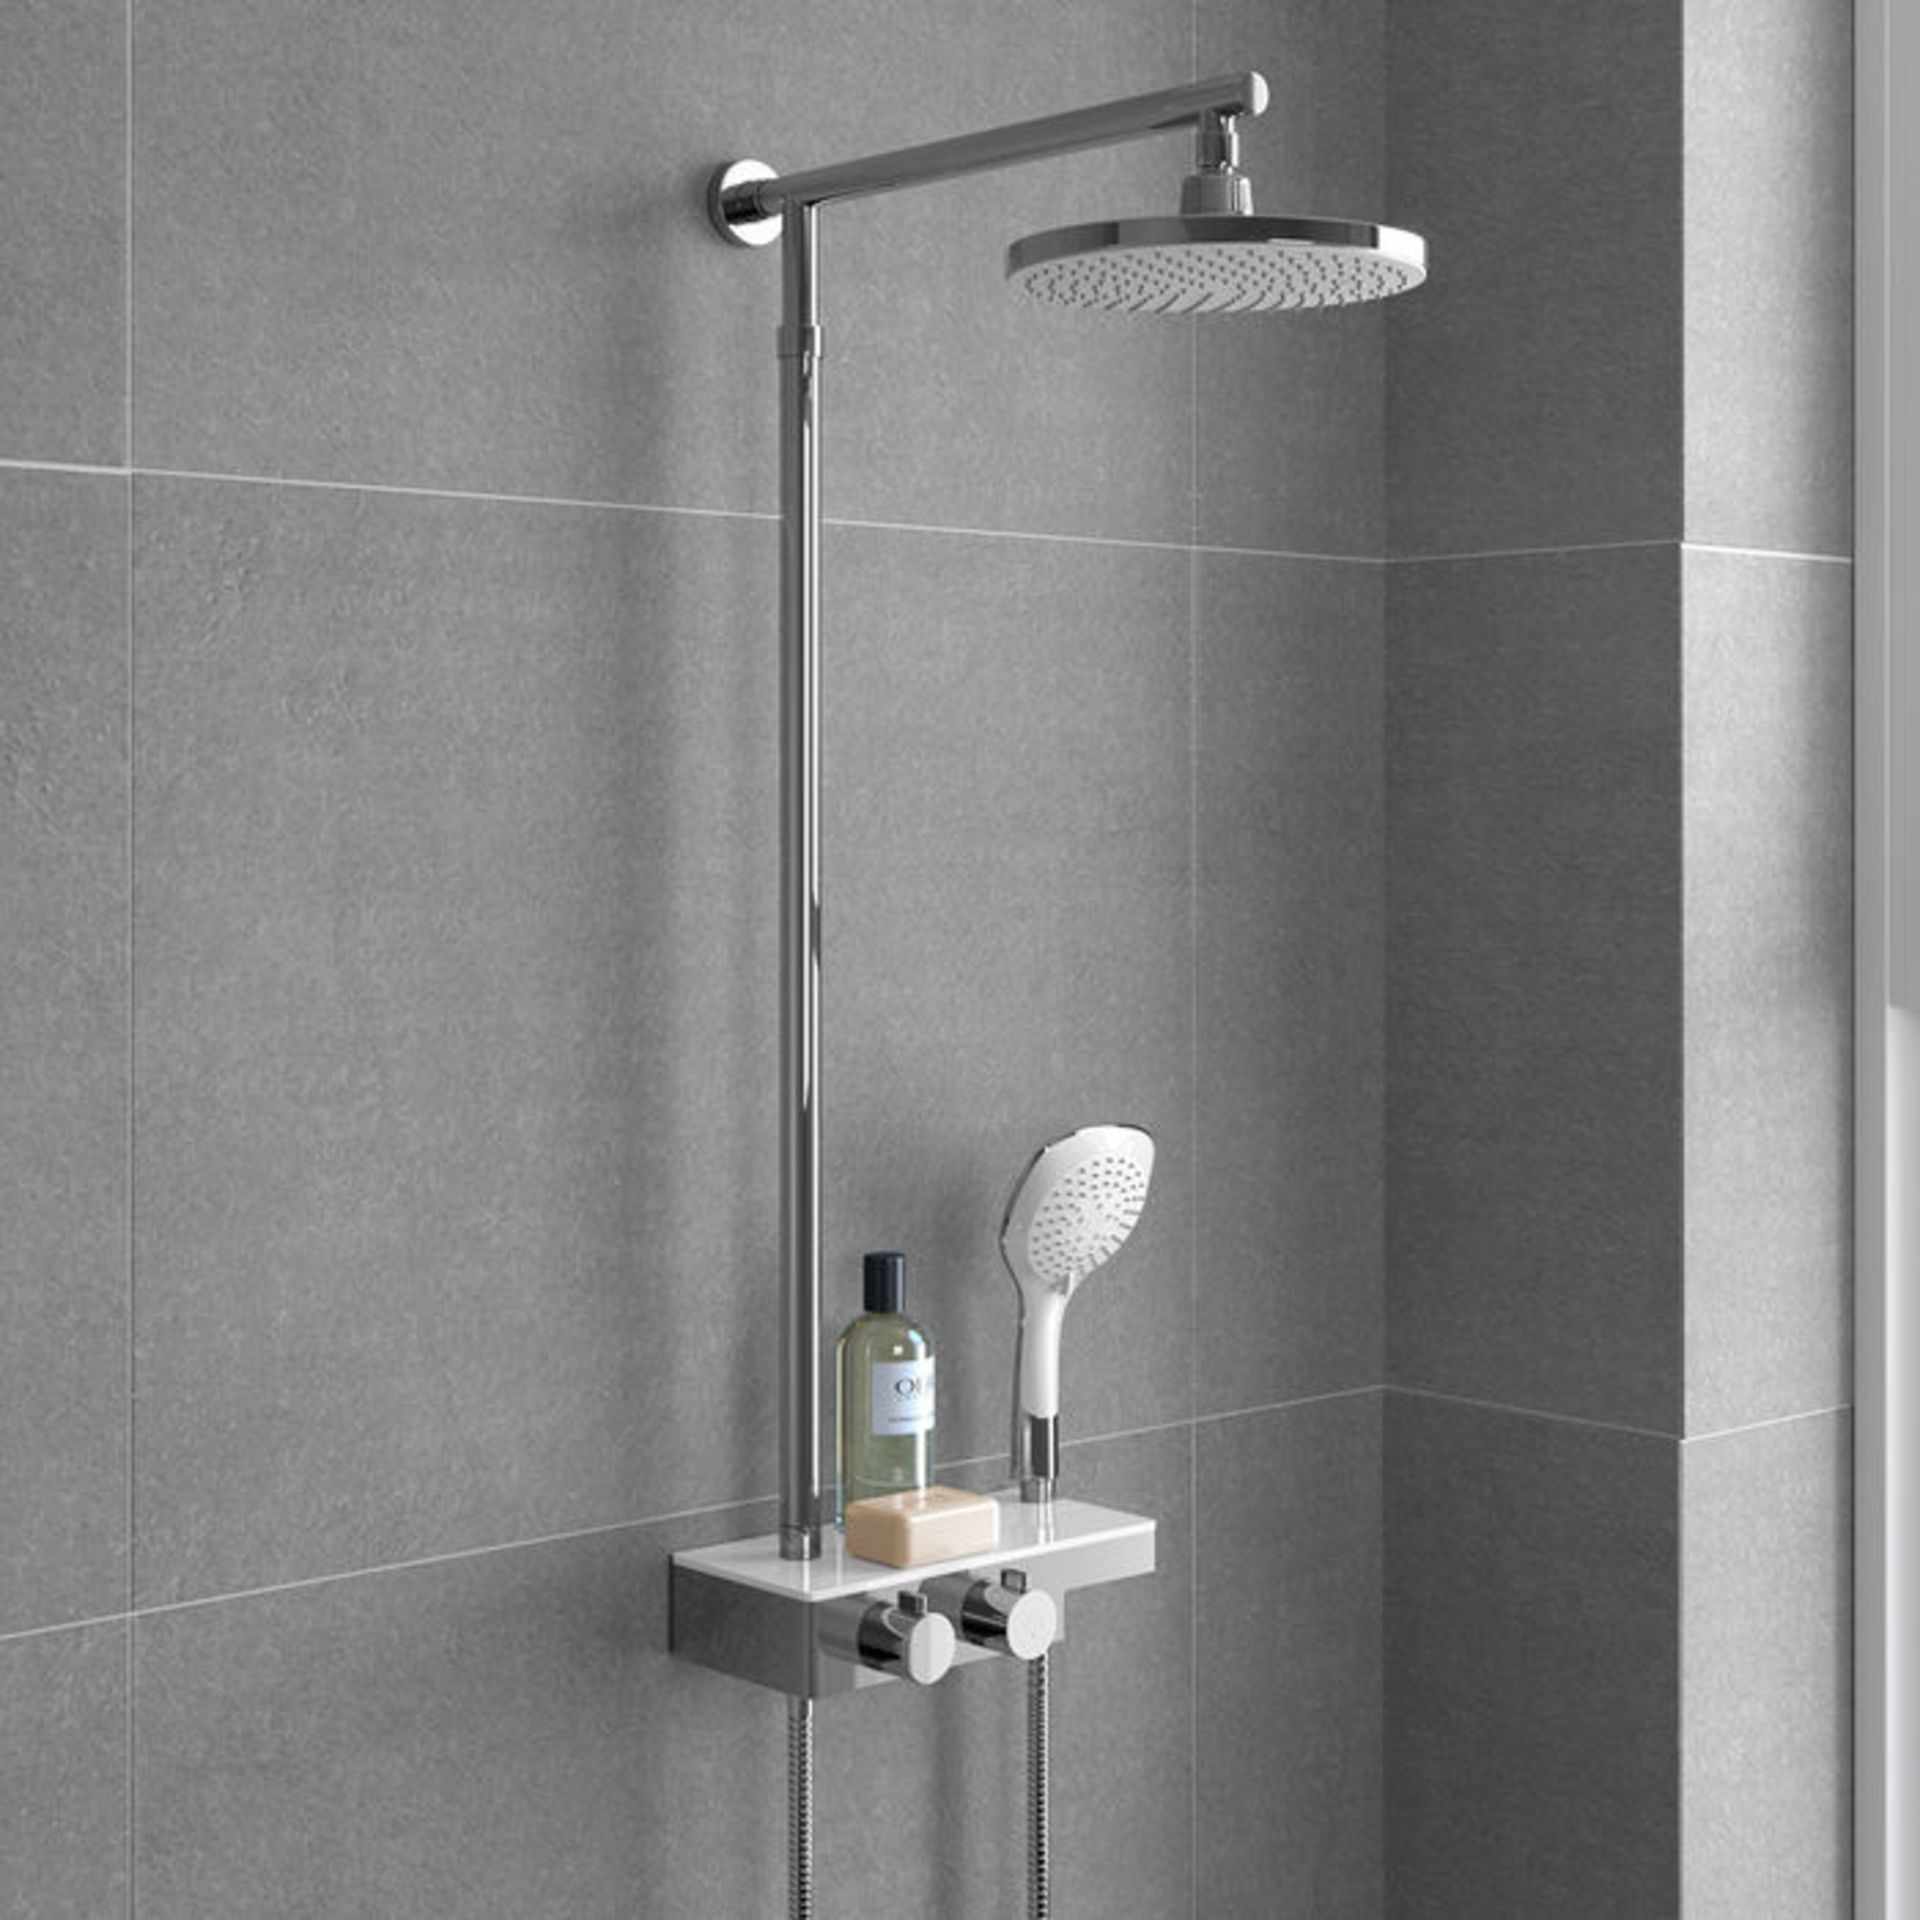 (KL181) Round Exposed Thermostatic Mixer Shower Kit Medium Head & Shelf. Cool to touch shower for - Image 2 of 4